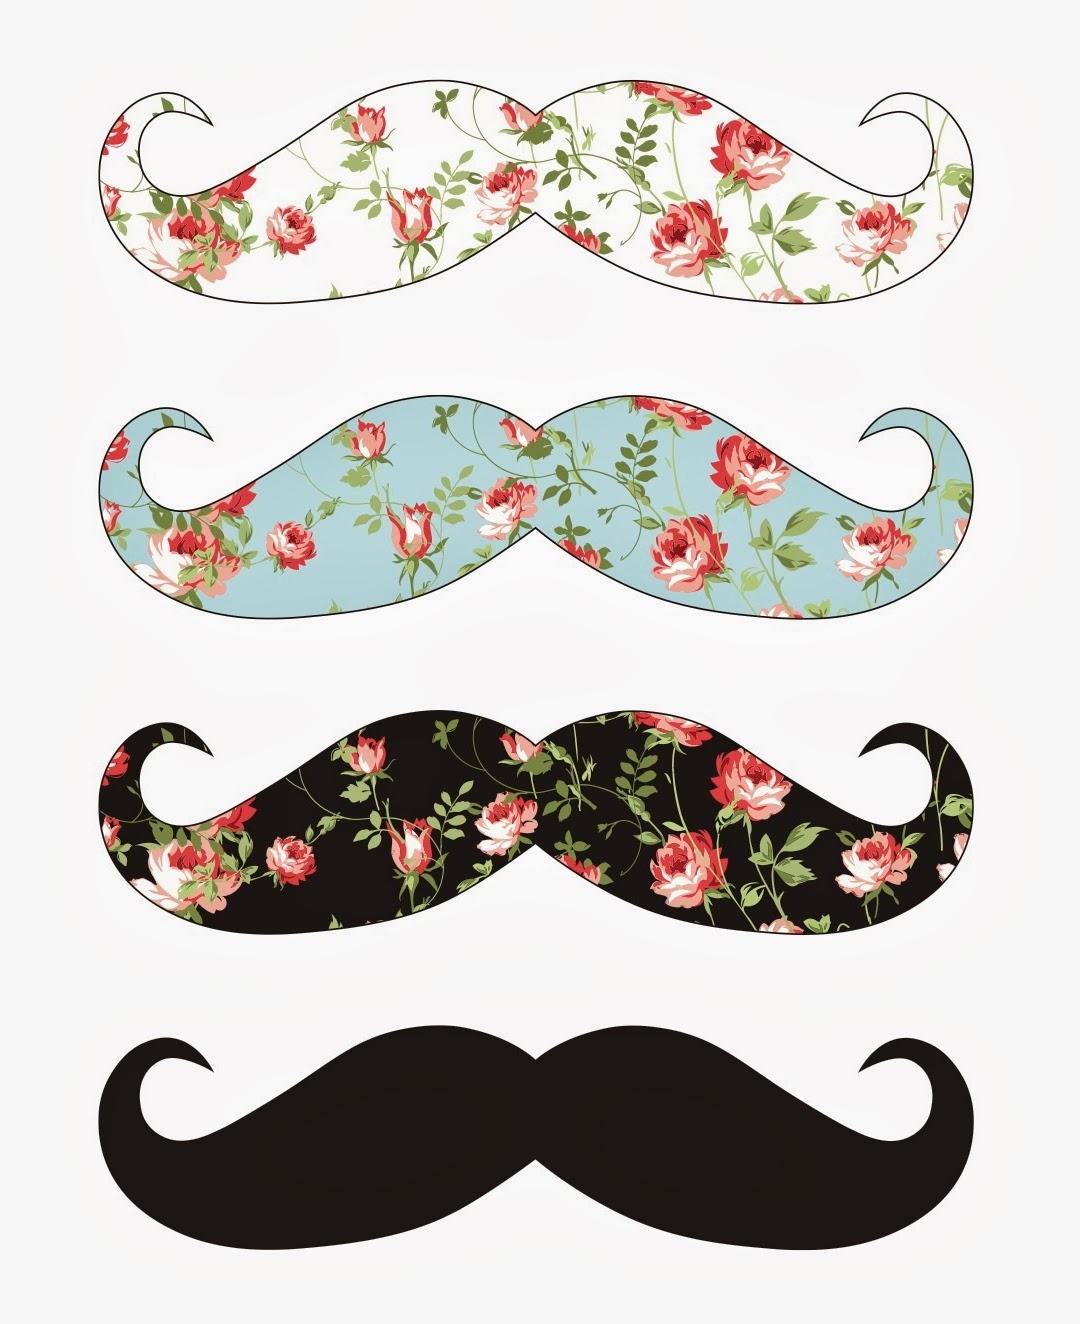 Cute Mustache Wallpapers For Iphone Theyre the most cute mustache